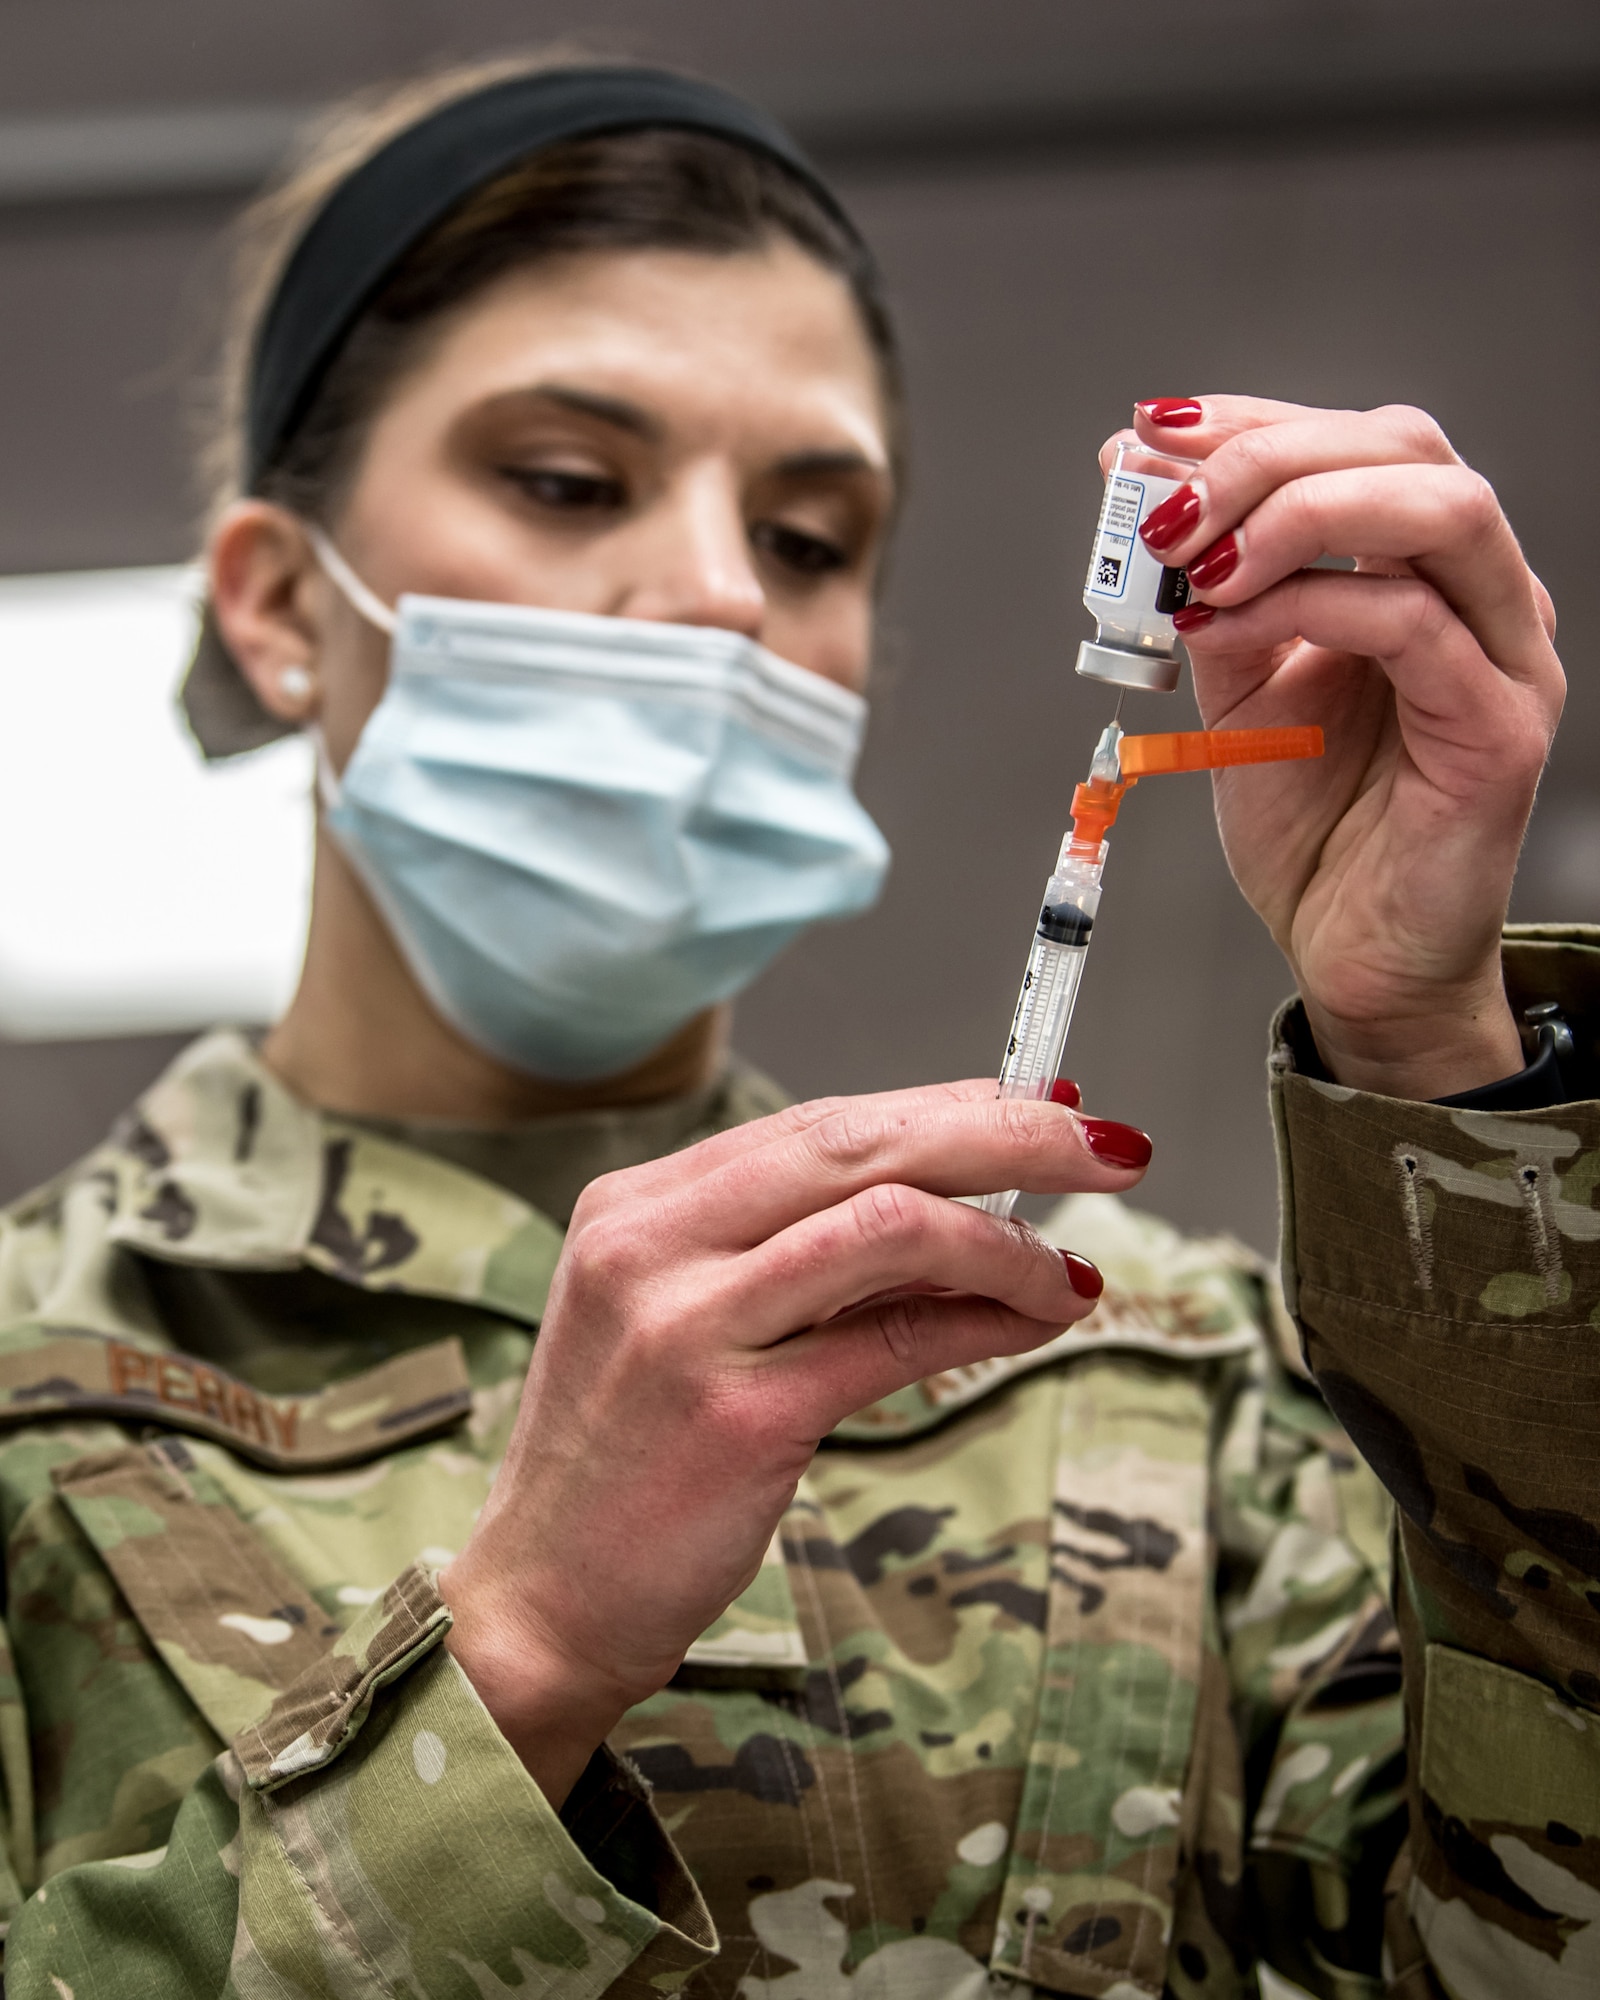 Master Sgt. Natasha Perry, a medic with the 123rd Medical Group, prepares to administer a COVID-19 vaccination to members of the 123rd Airlift Wing at the Kentucky Air National Guard Base in Louisville Ky., Jan. 9, 2021.